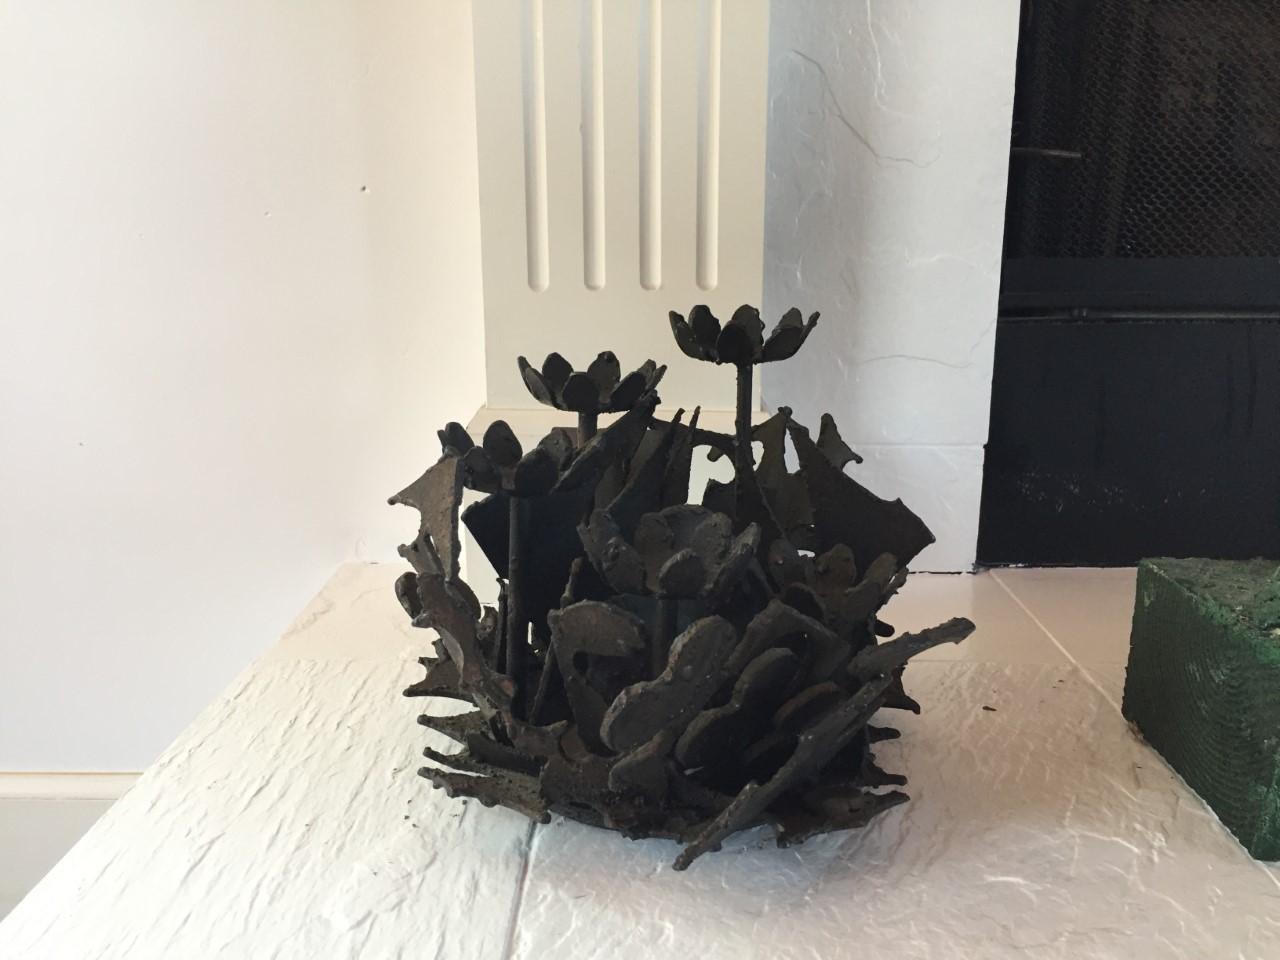 Brutalist welded-steel sculpture by Harry Wasserman. At 8.25” tall and 10” wide, this sculpture has an incredible elegant presence. Encircled flowers and leaves captured in steel evoke abstract and linear shapes. The somber and rough techniques of